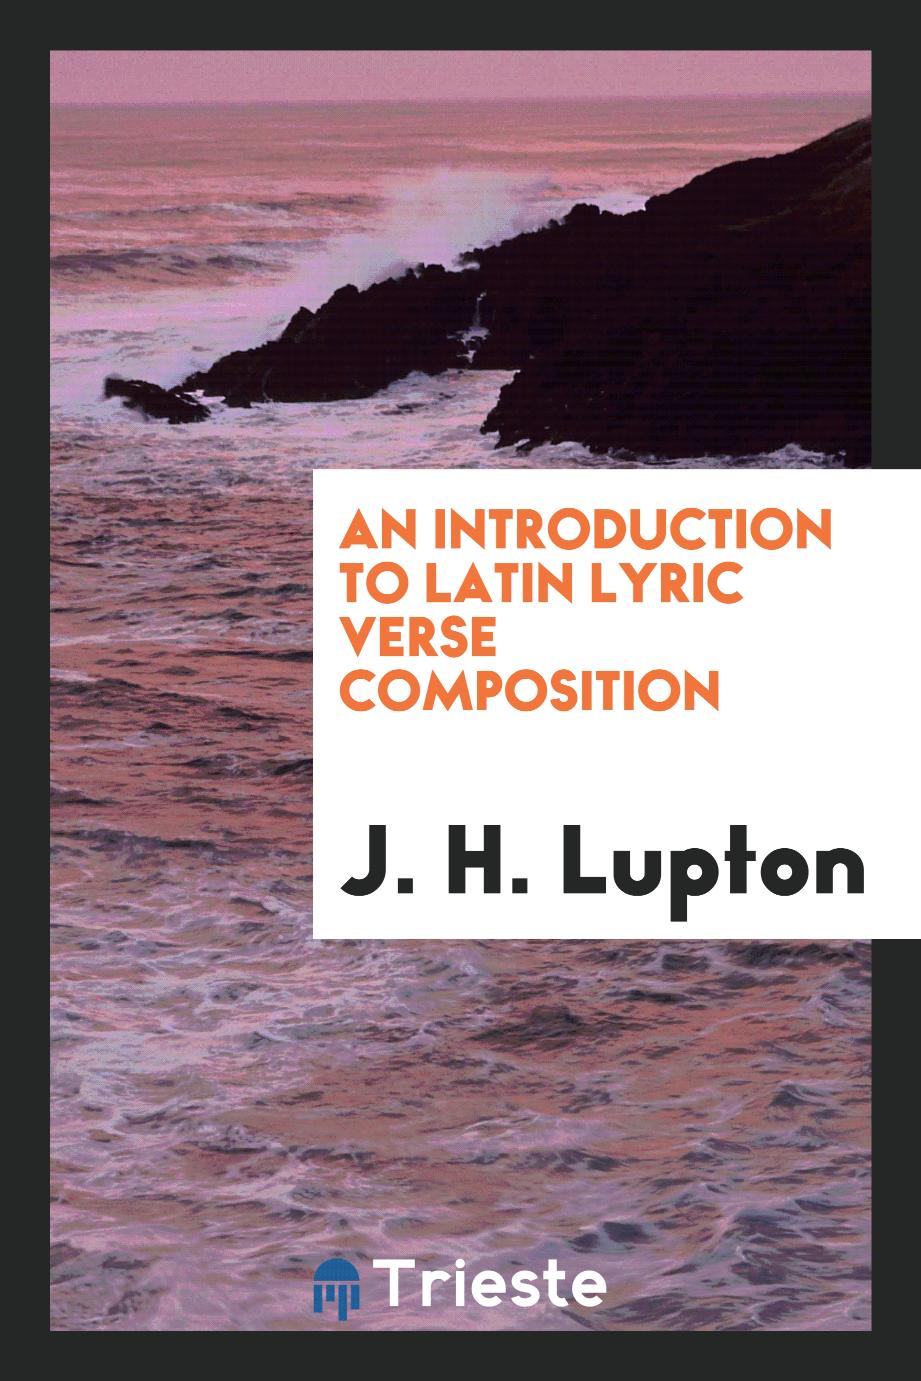 An Introduction to Latin Lyric Verse Composition